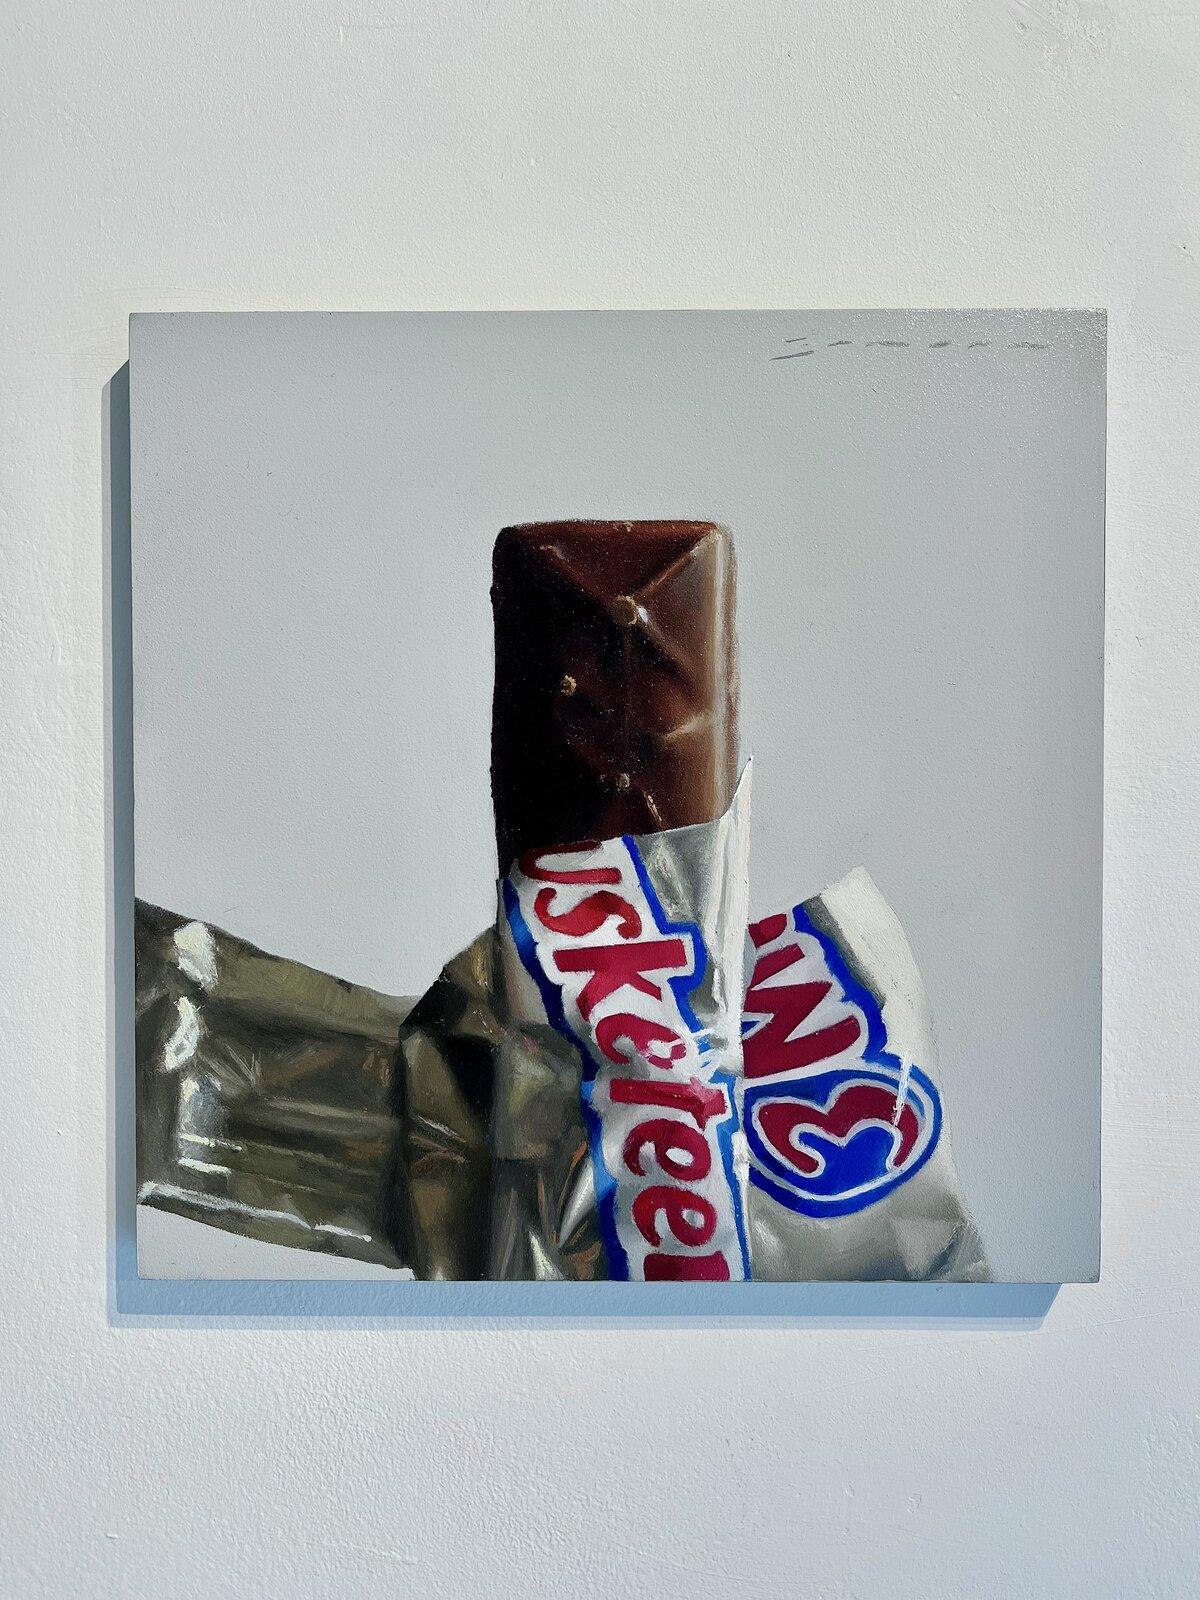 3 Musketeers-original impressionism still life oil painting-contemporary Art - Photorealist Painting by James Zamora